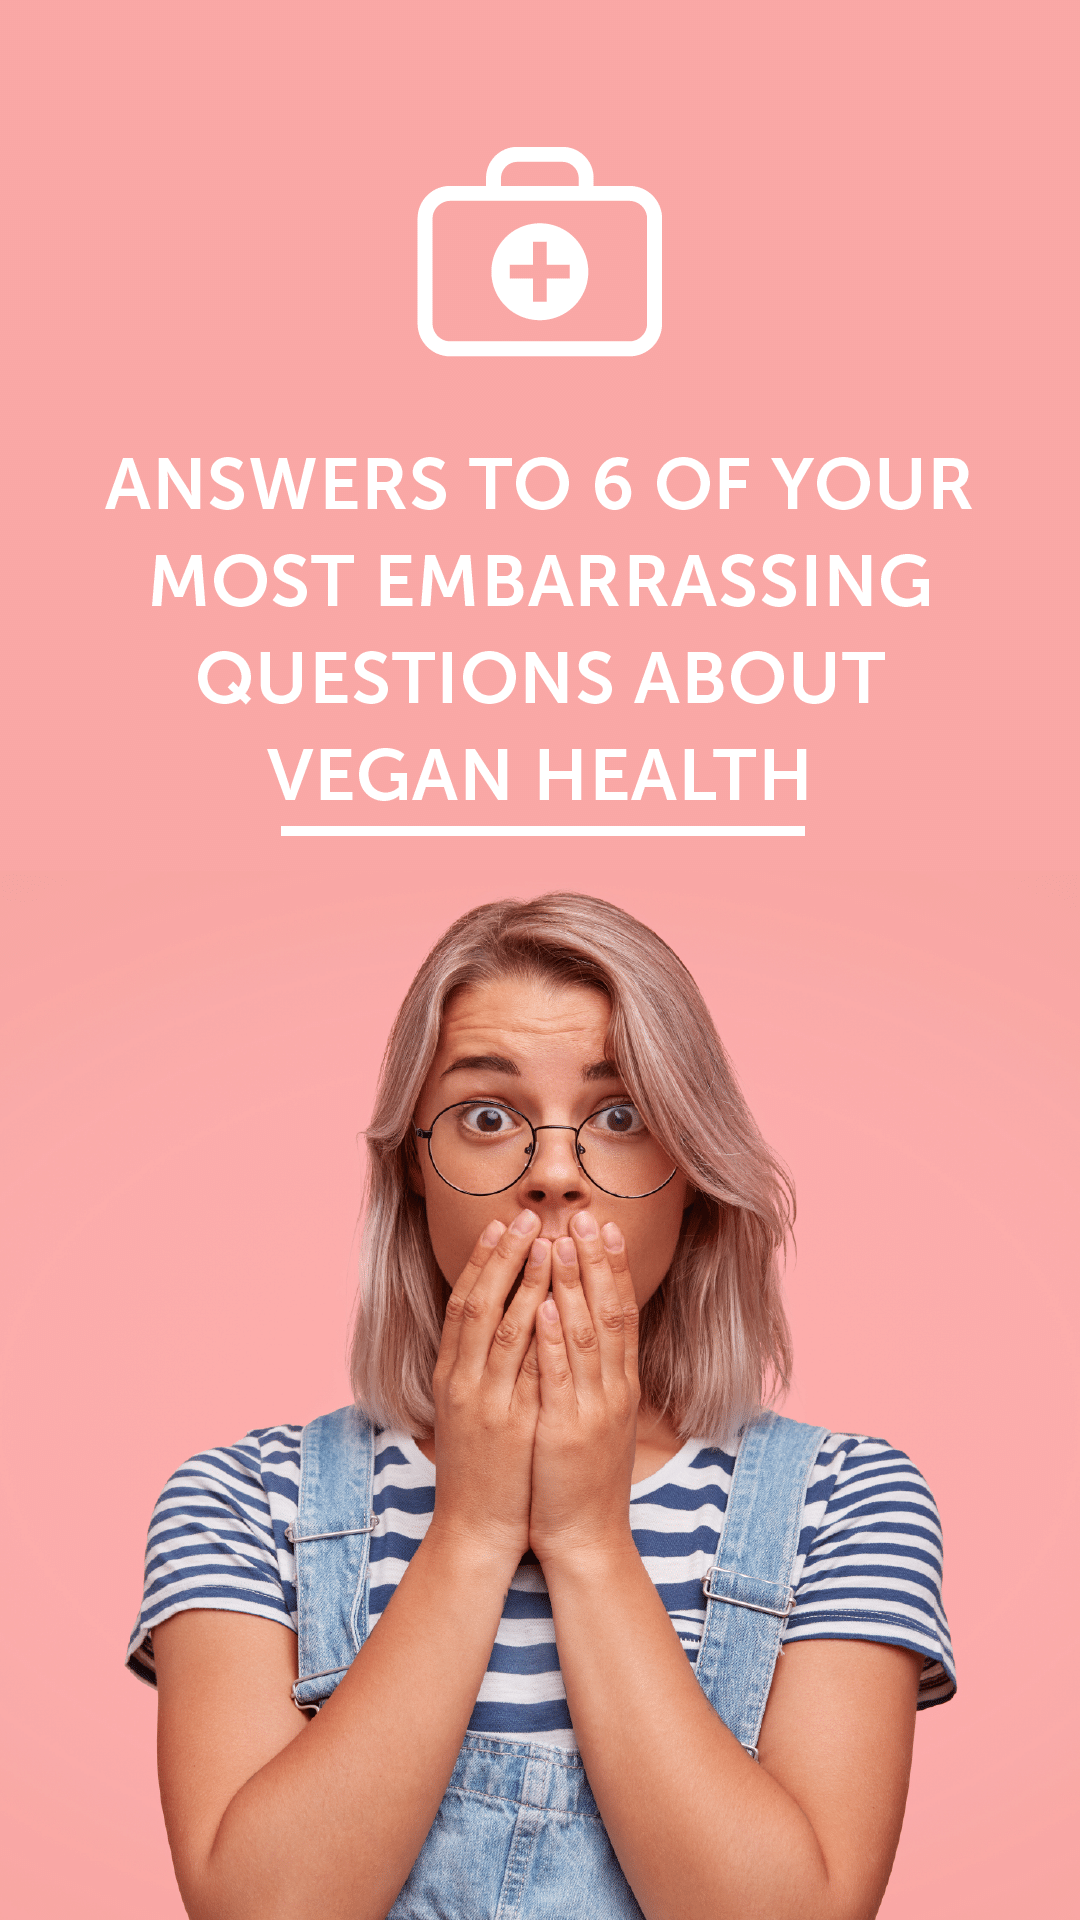 Answers to 6 of Your Most Embarrassing Questions About Vegan Health